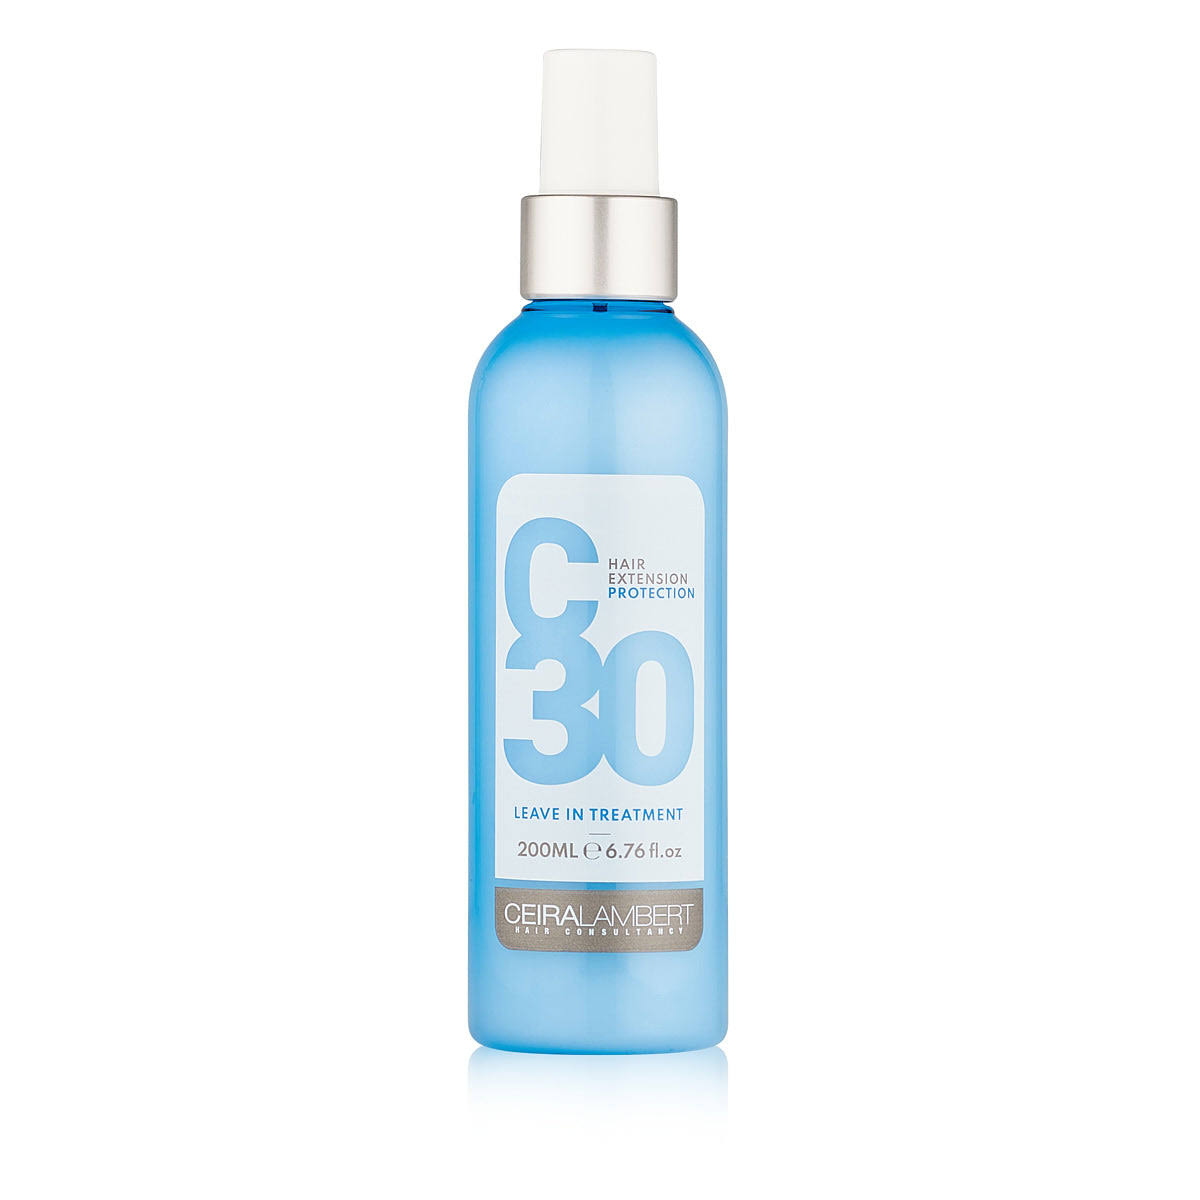 C30 - Hair Extension Protection Leave-In Treatment